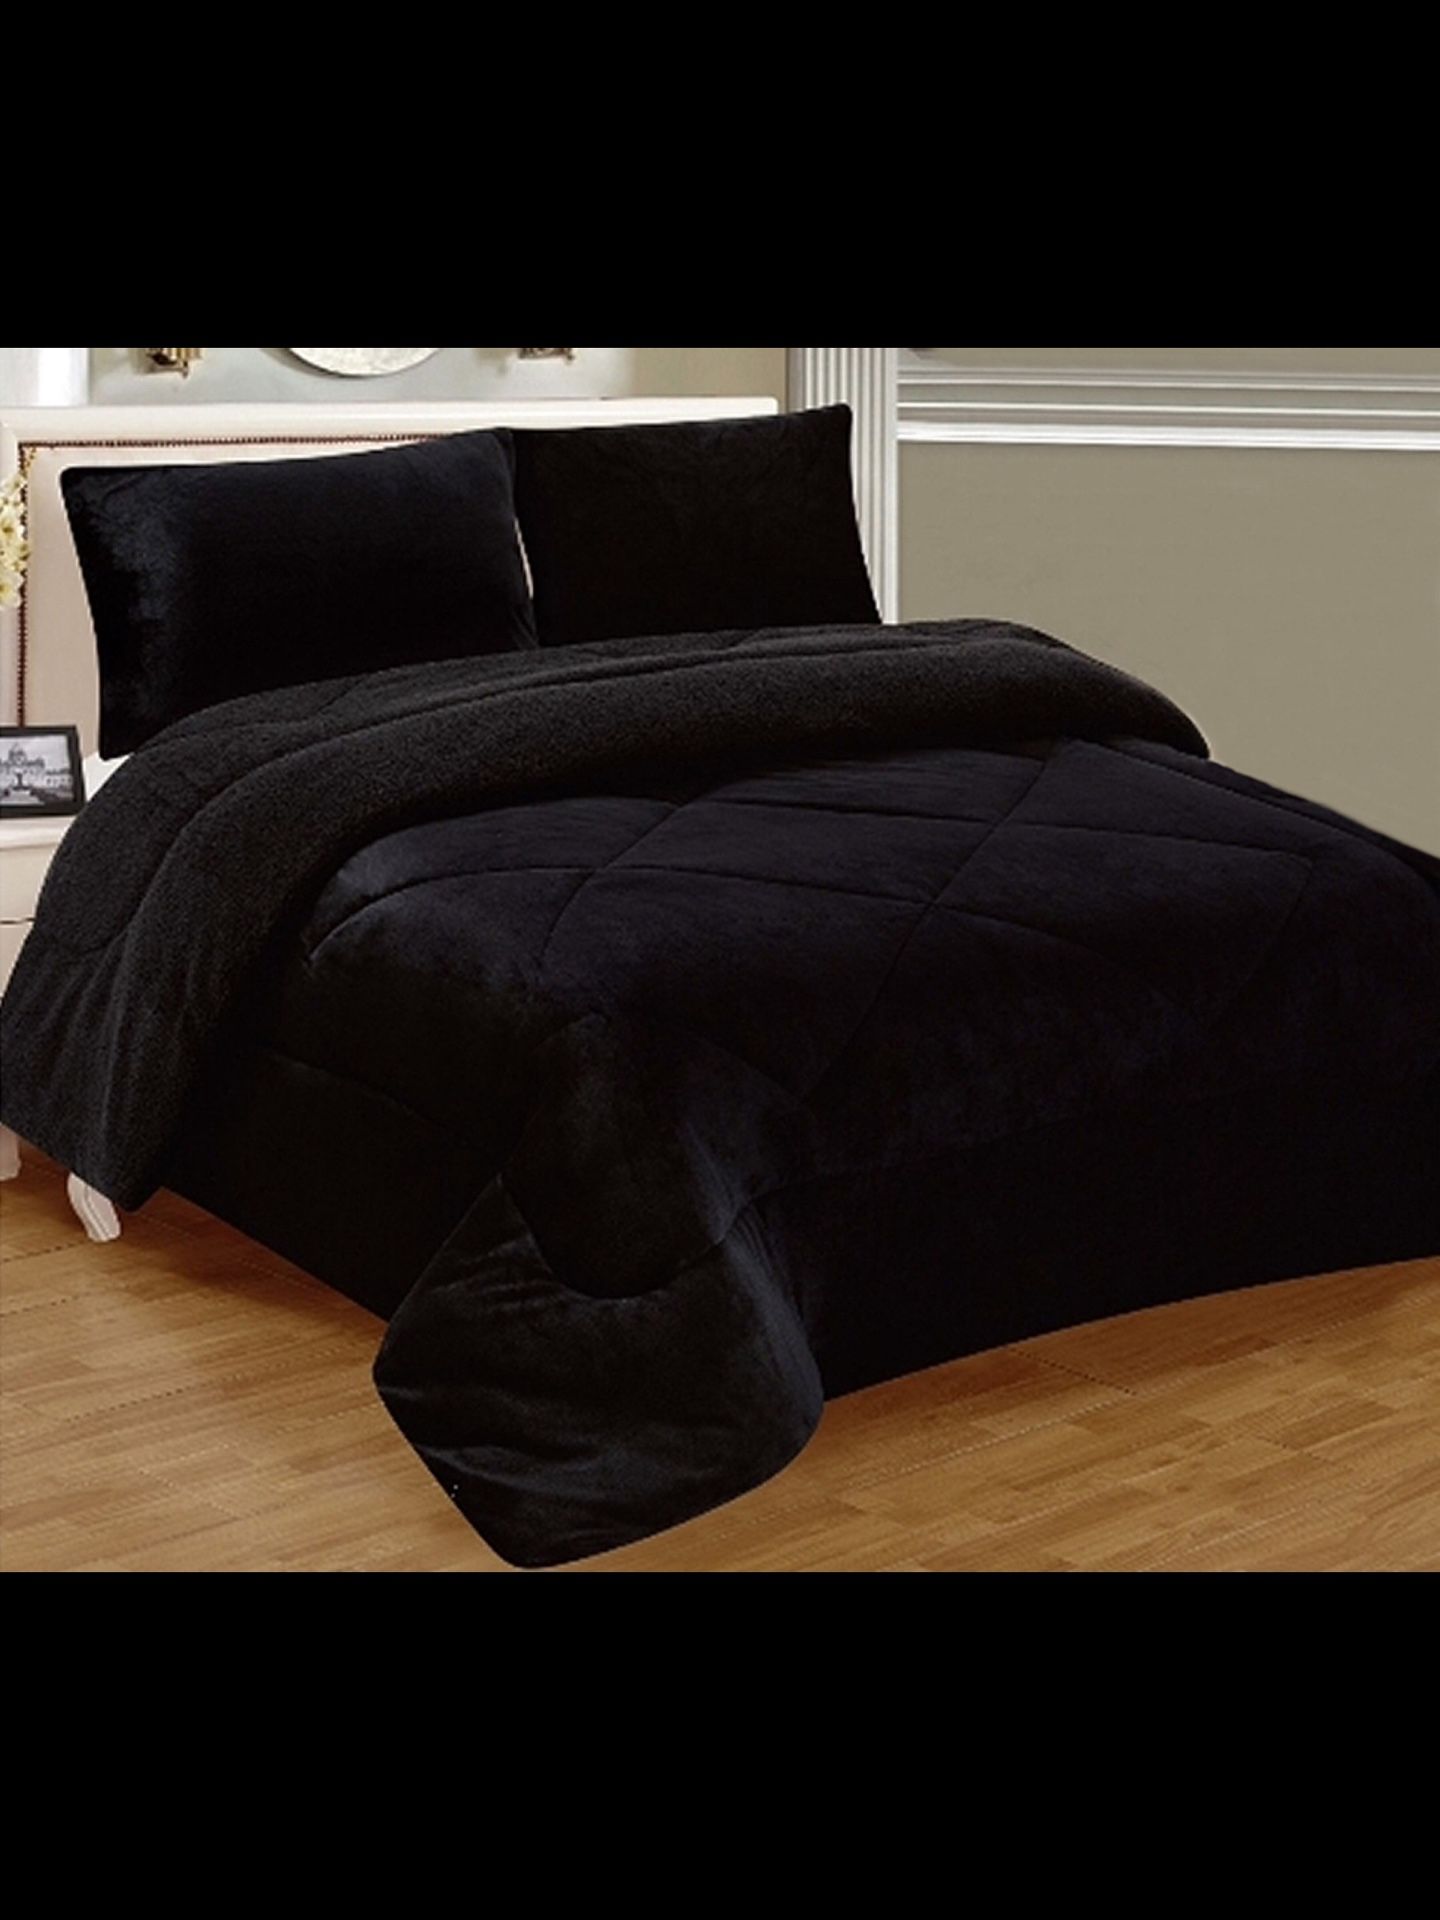 Brand New Black Warm Super Thick Soft Borrego Sherpa Quilted Blanket 3 Piece Set with Pillow Shams Queen Size